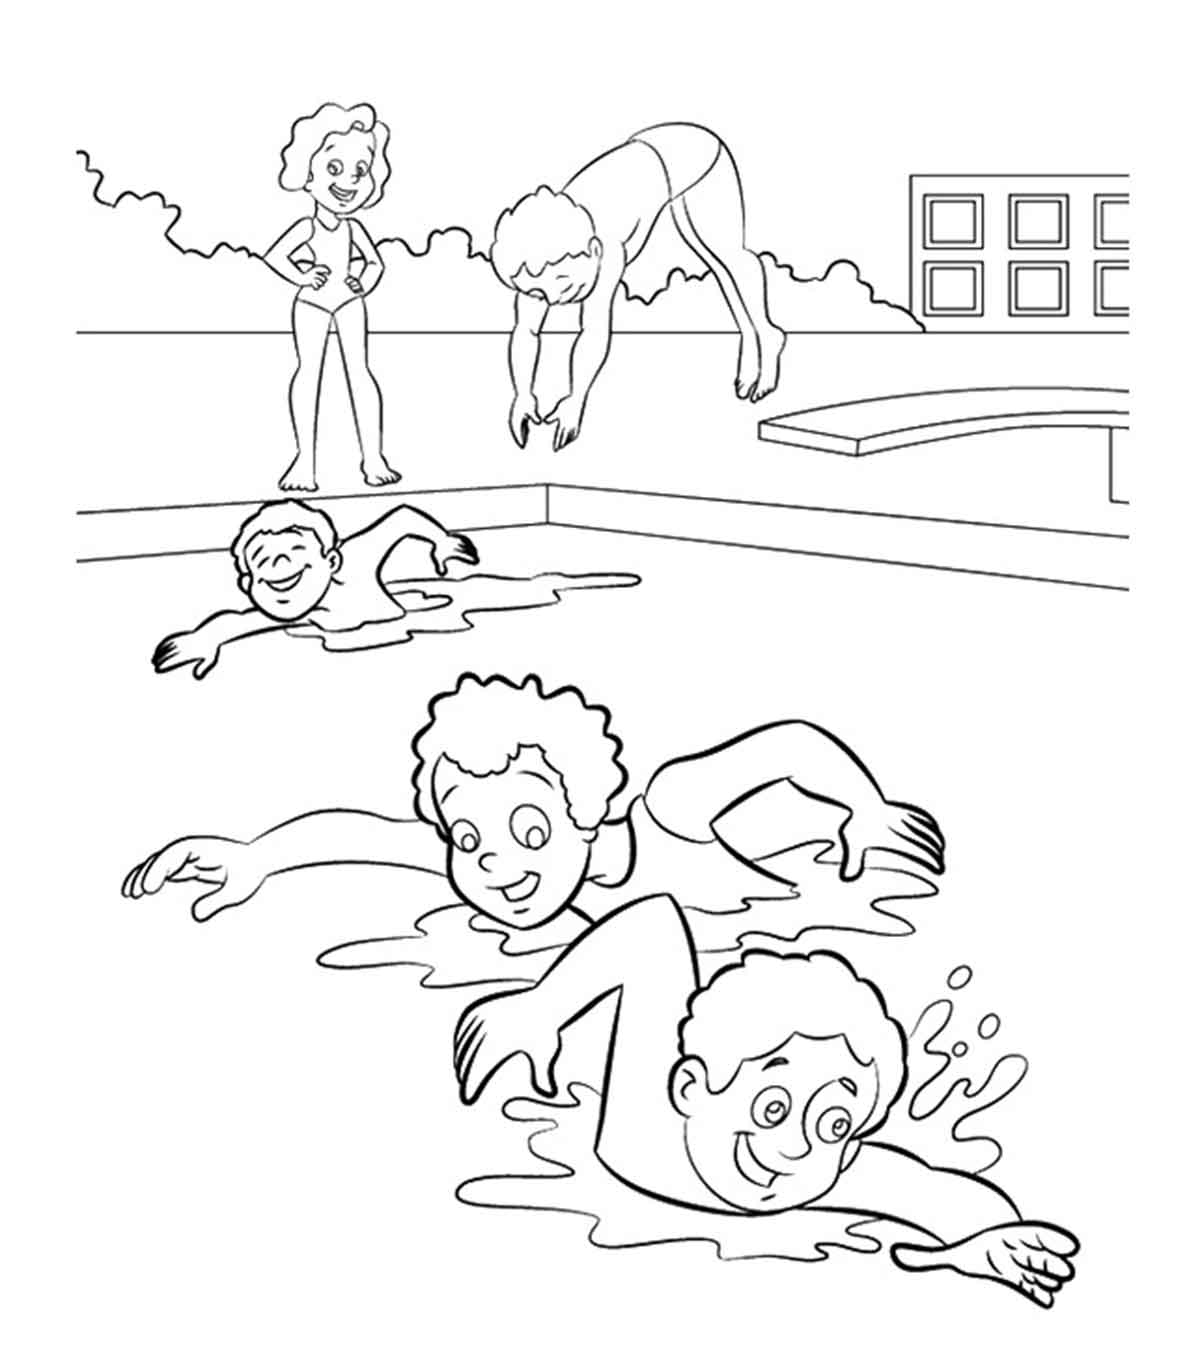 kids-swimming-coloring-pages-smart-kiddy-blogspot